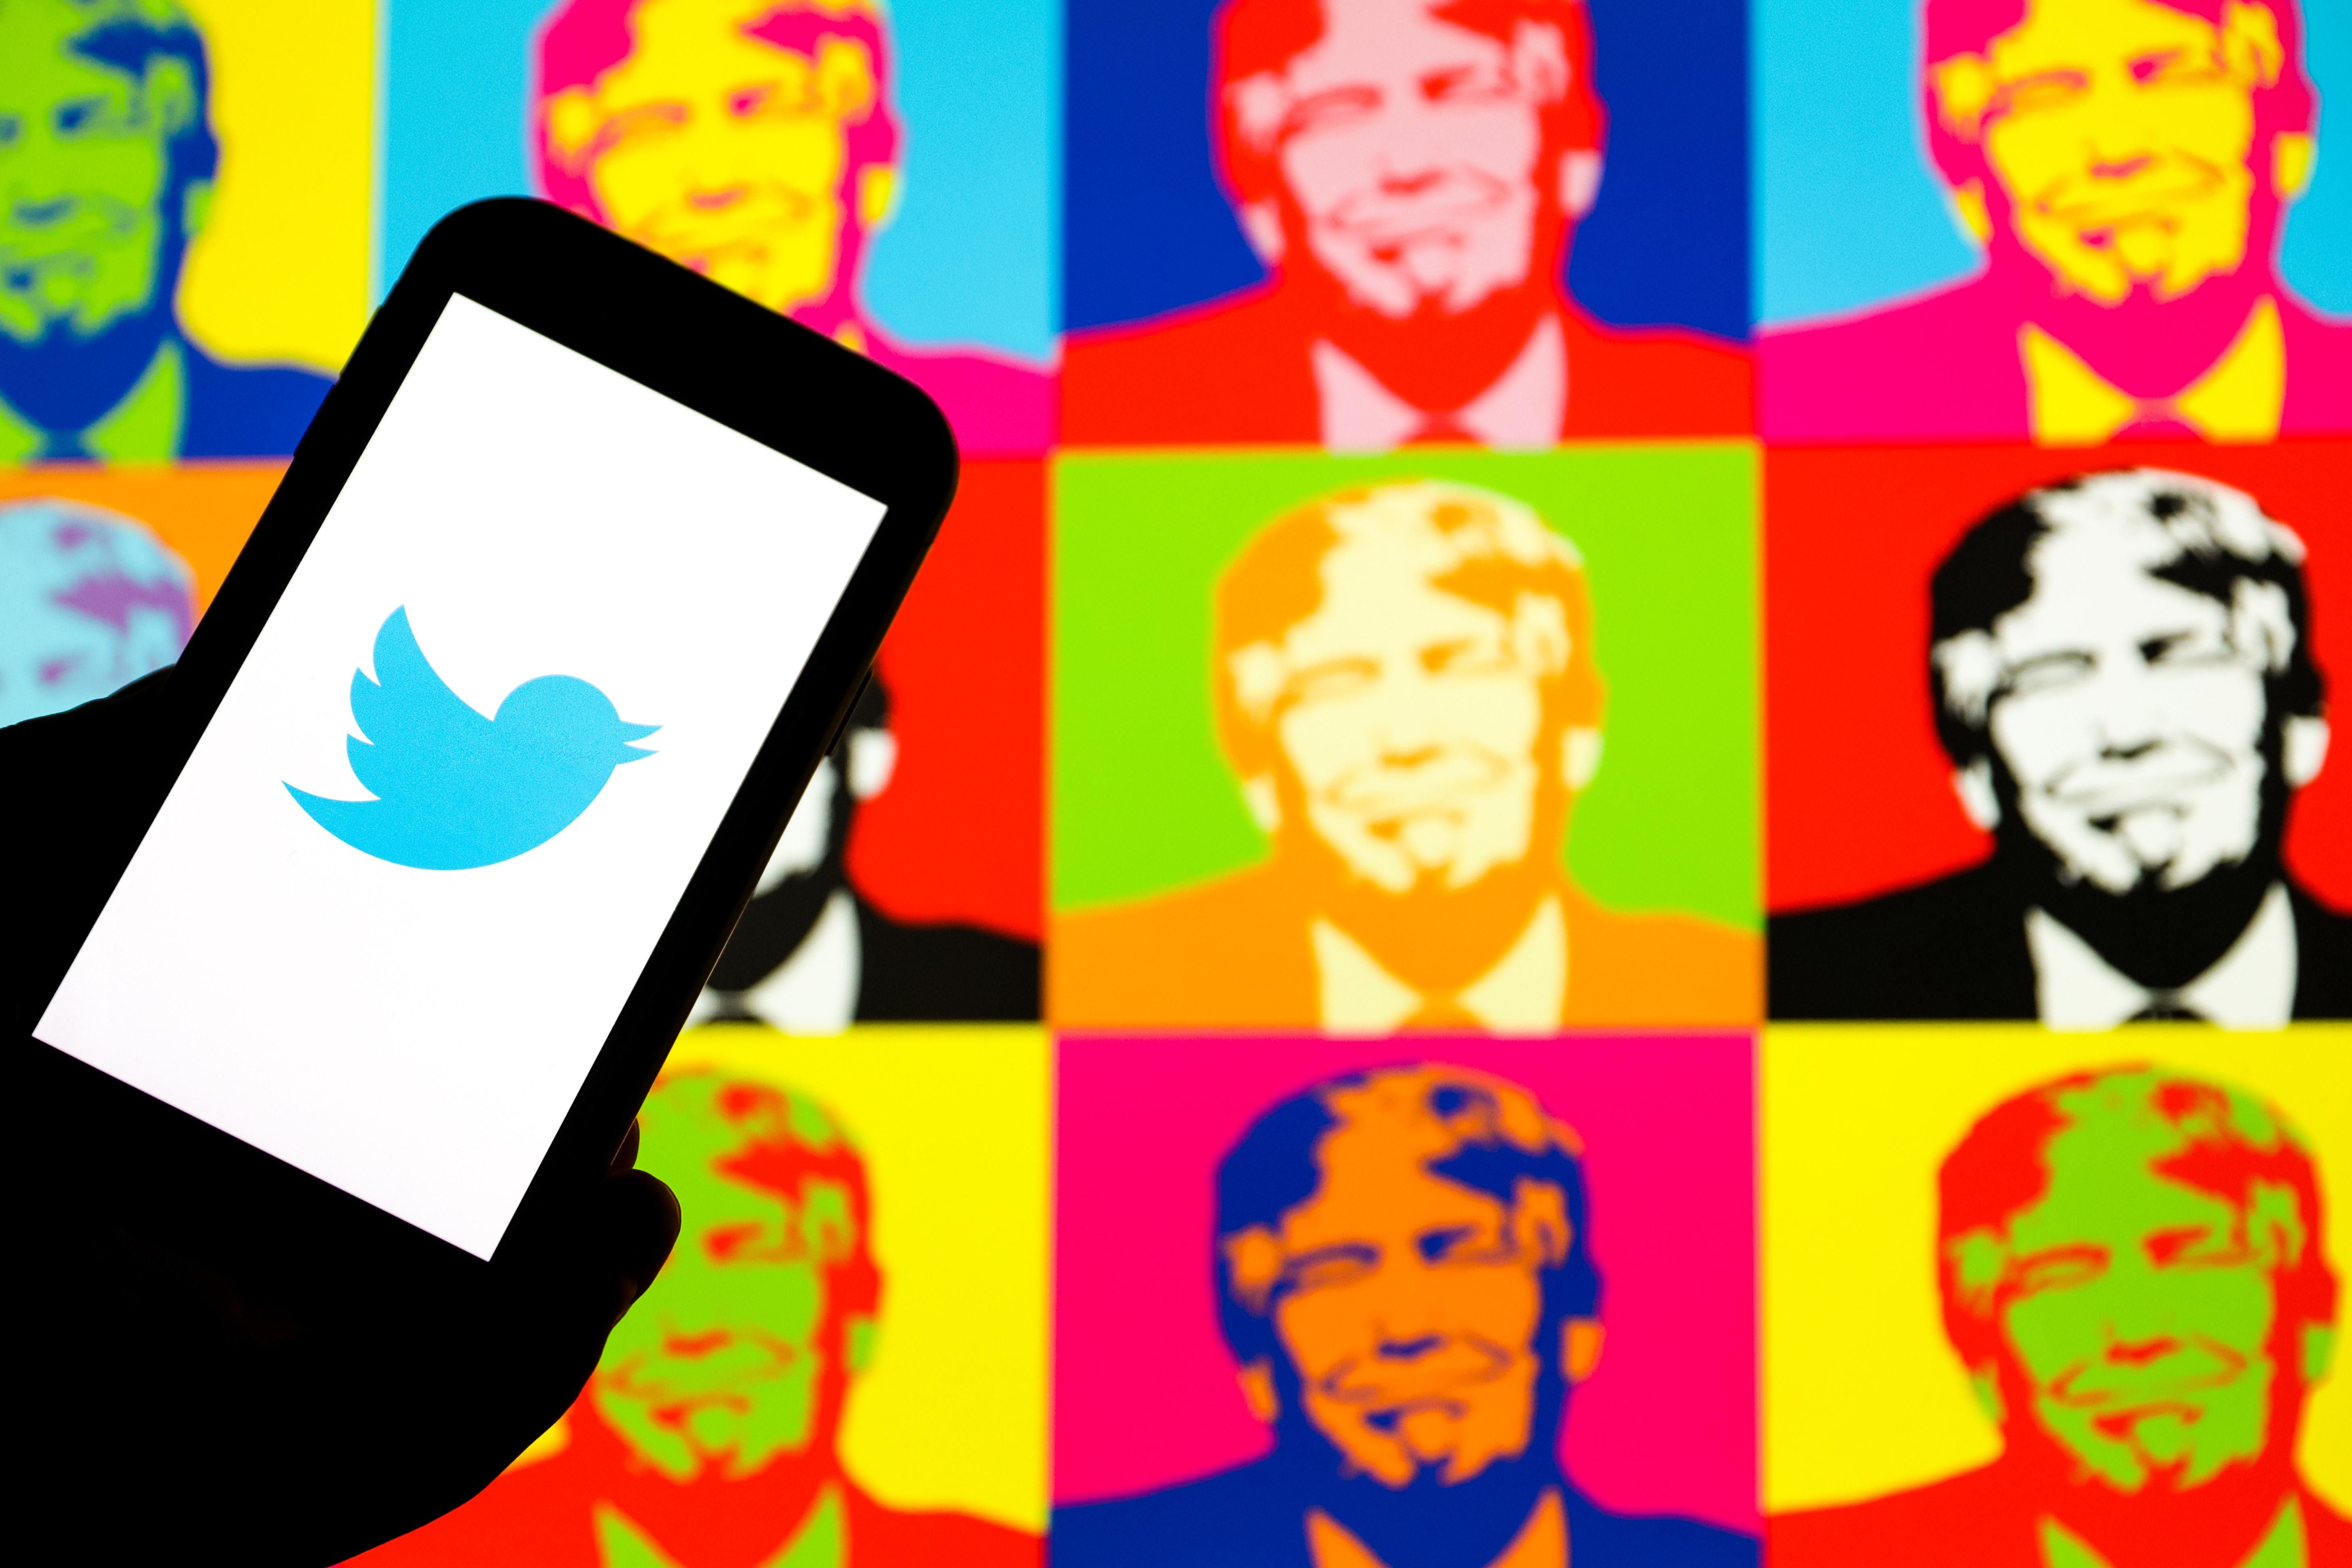 Twitter logo displayed on a smartphone with multiple colorful faces of Donald Trump in the background.